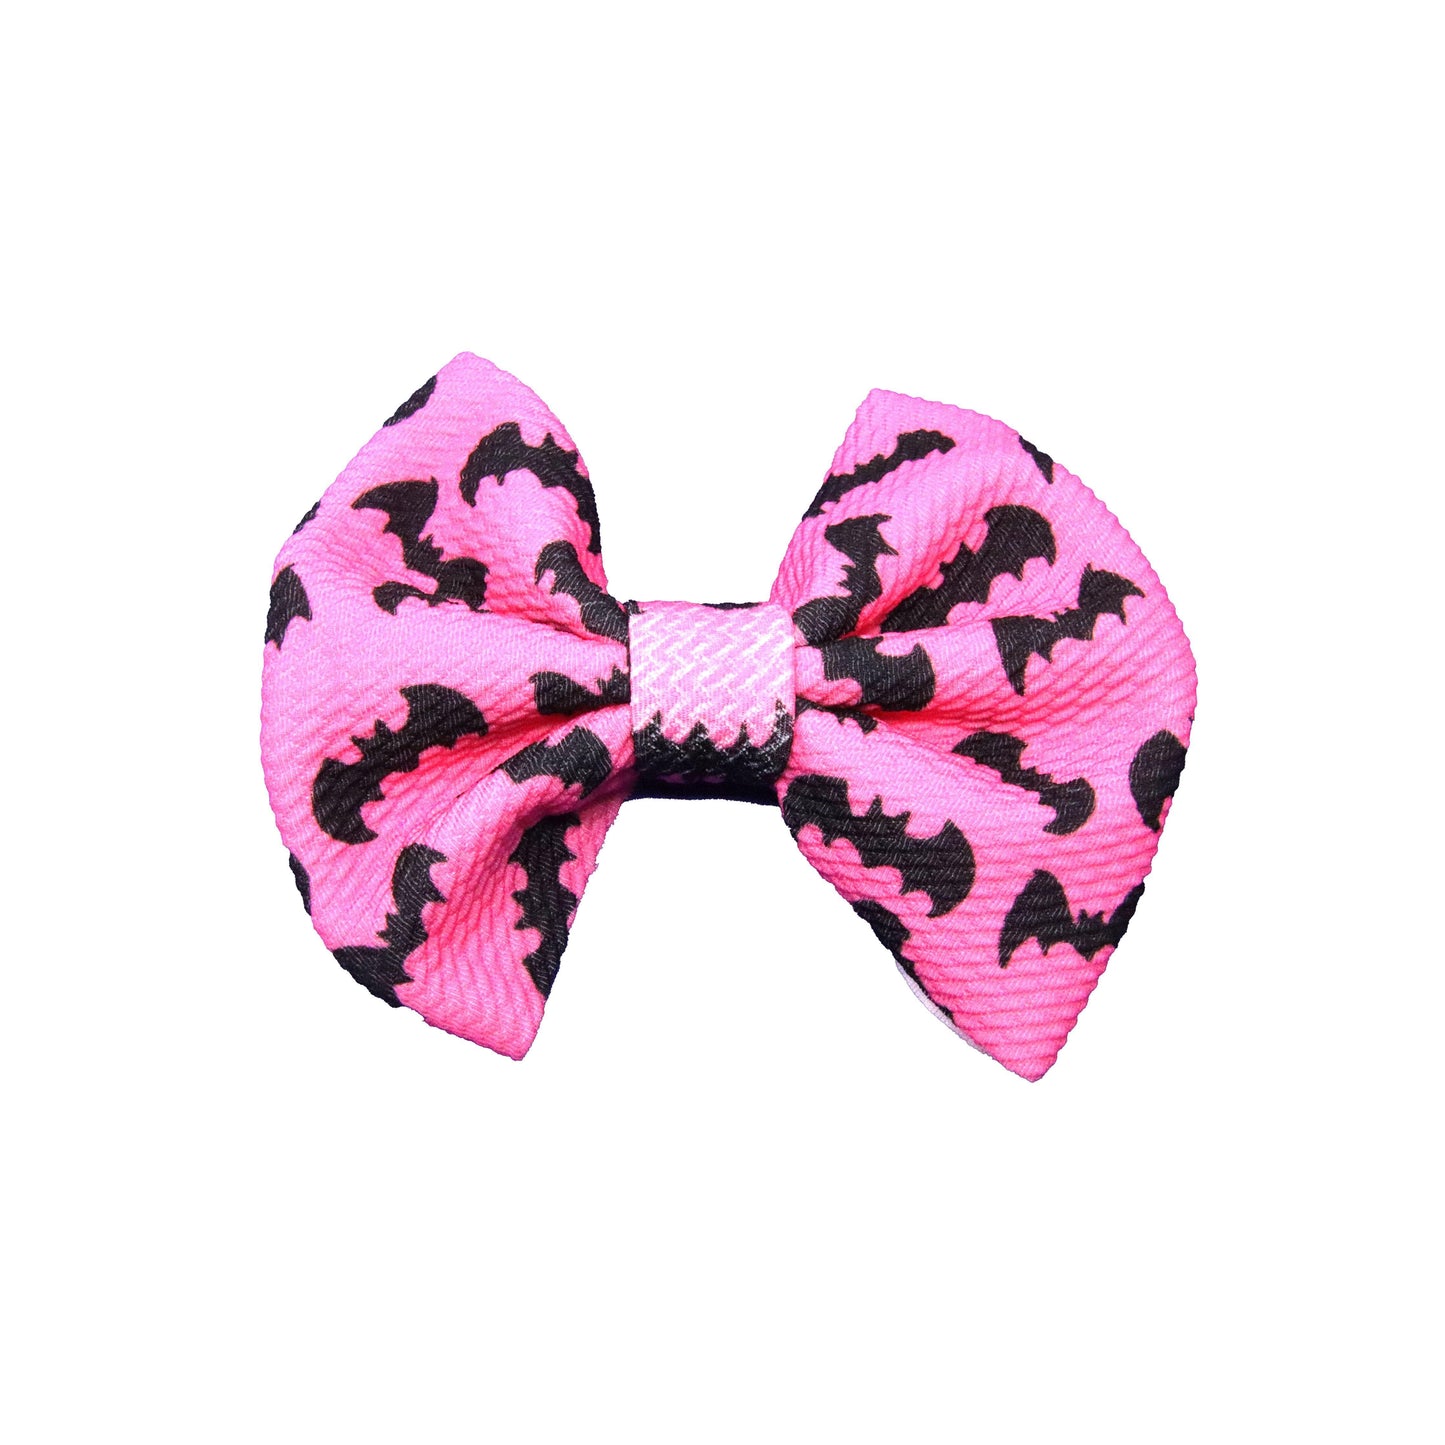 5", Bow, Hair Bow, Pink Bats, Fabric Bow, New Product - 04OCT2020